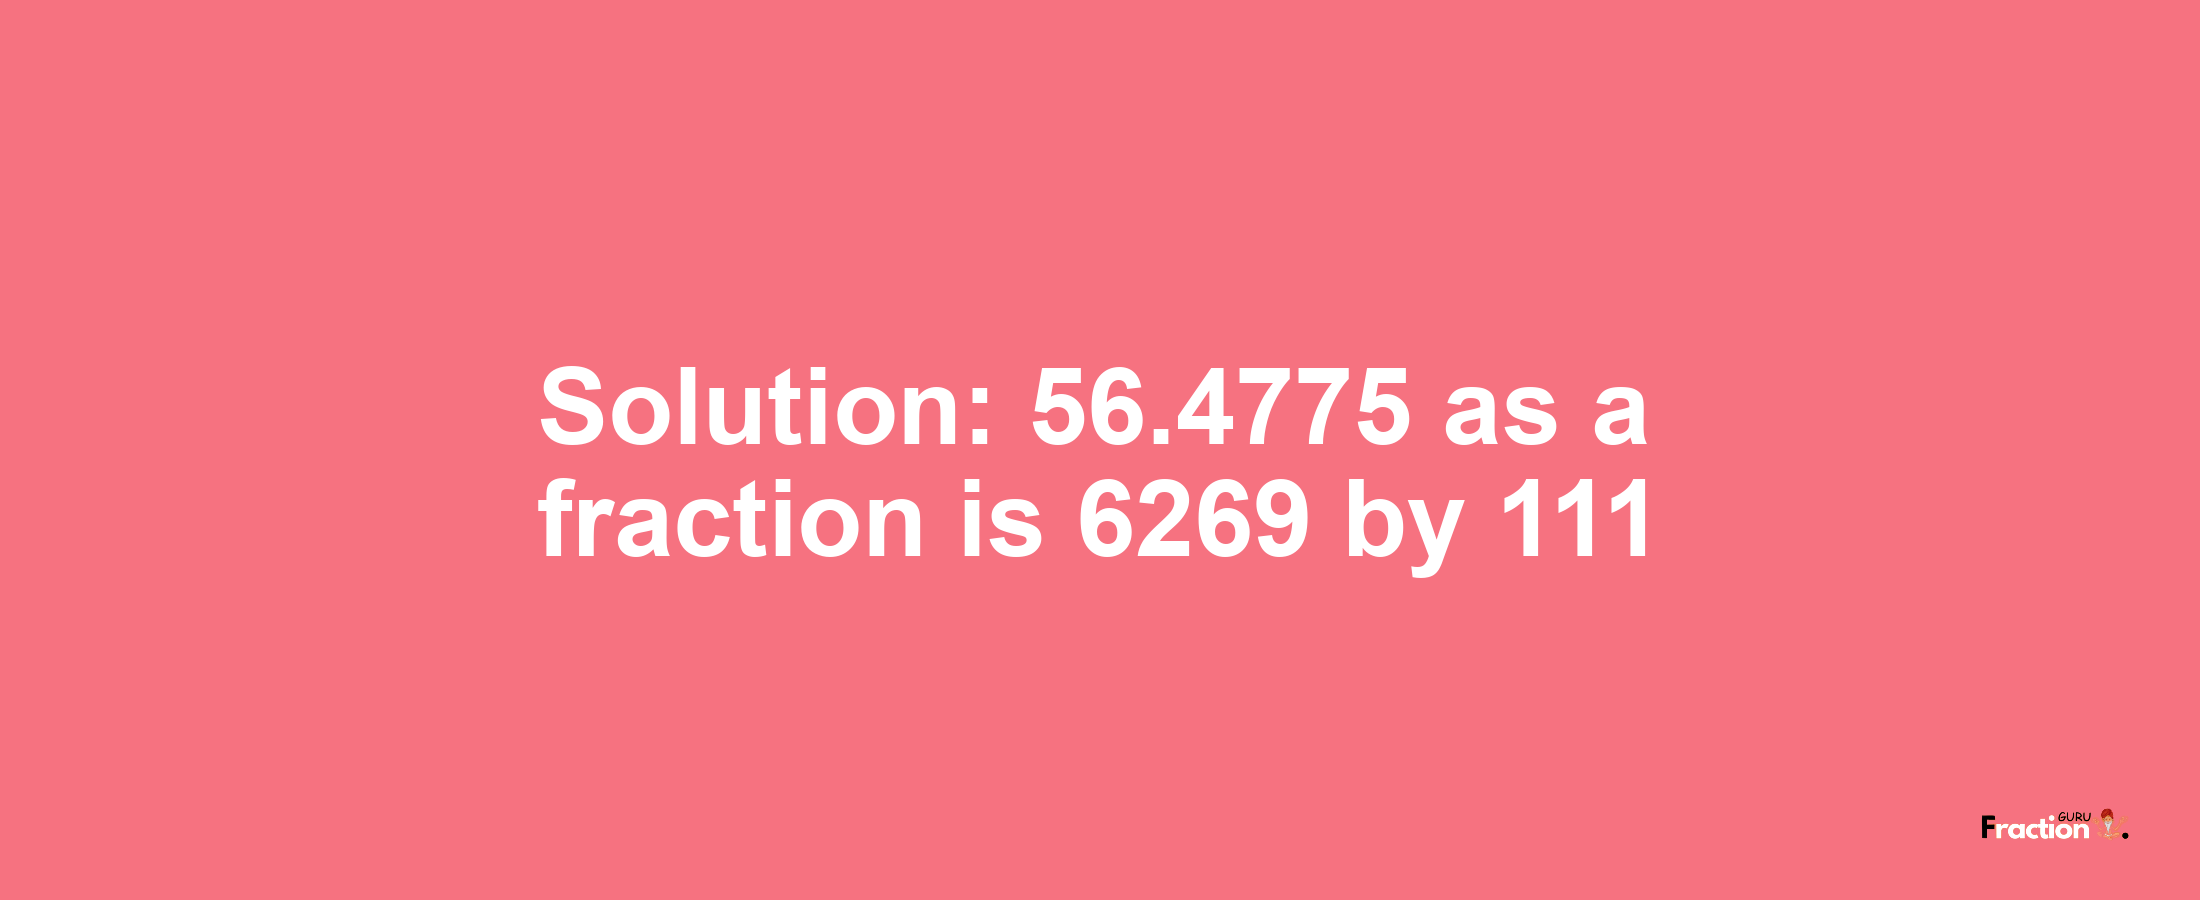 Solution:56.4775 as a fraction is 6269/111